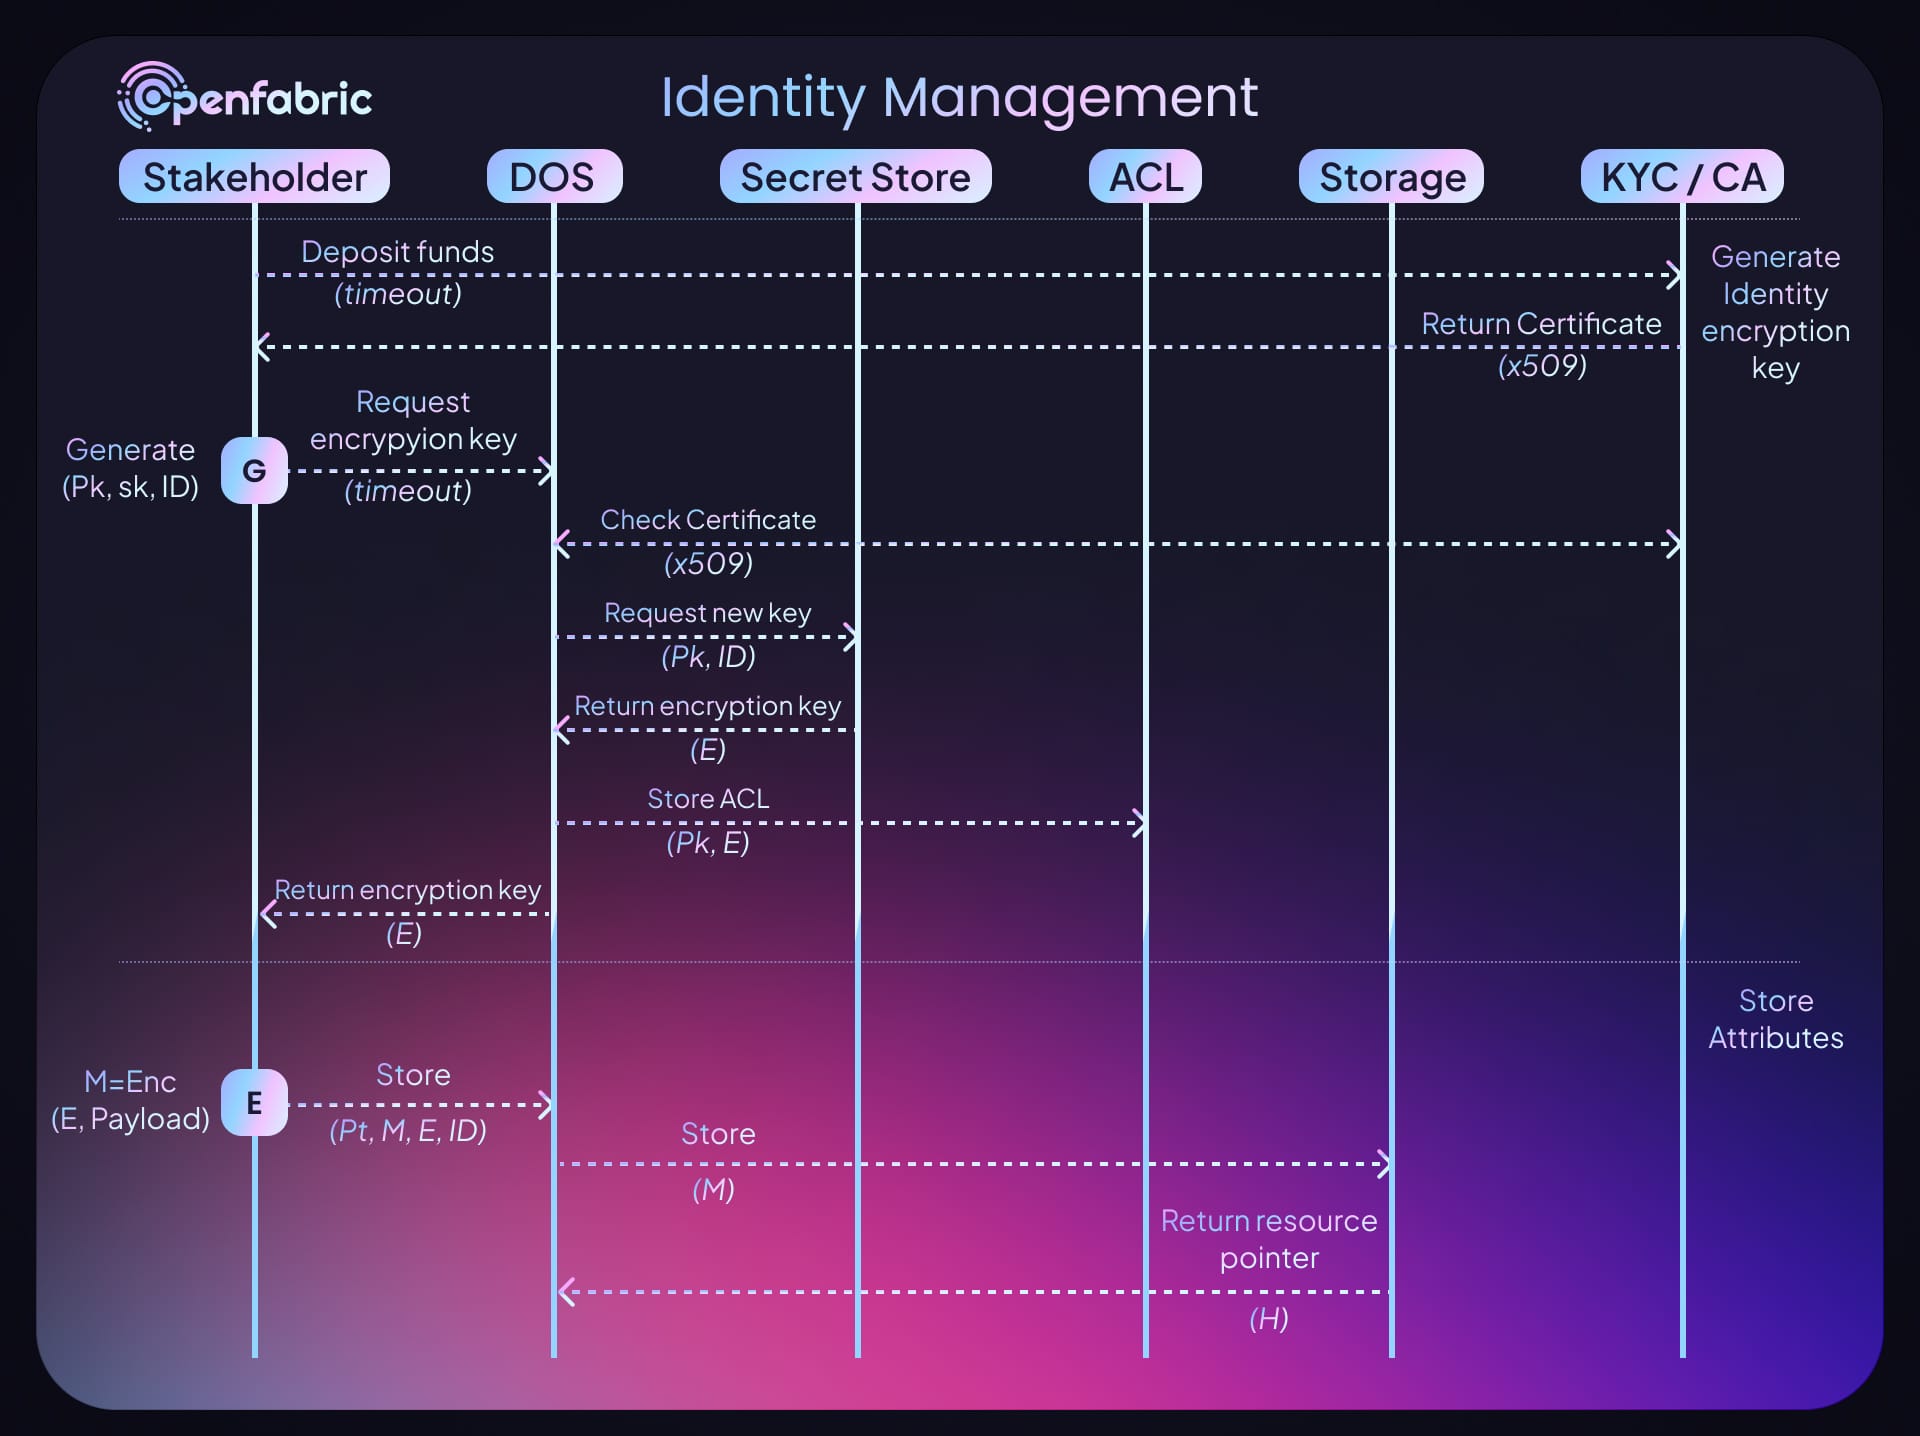 April highlights showing management of user identity 